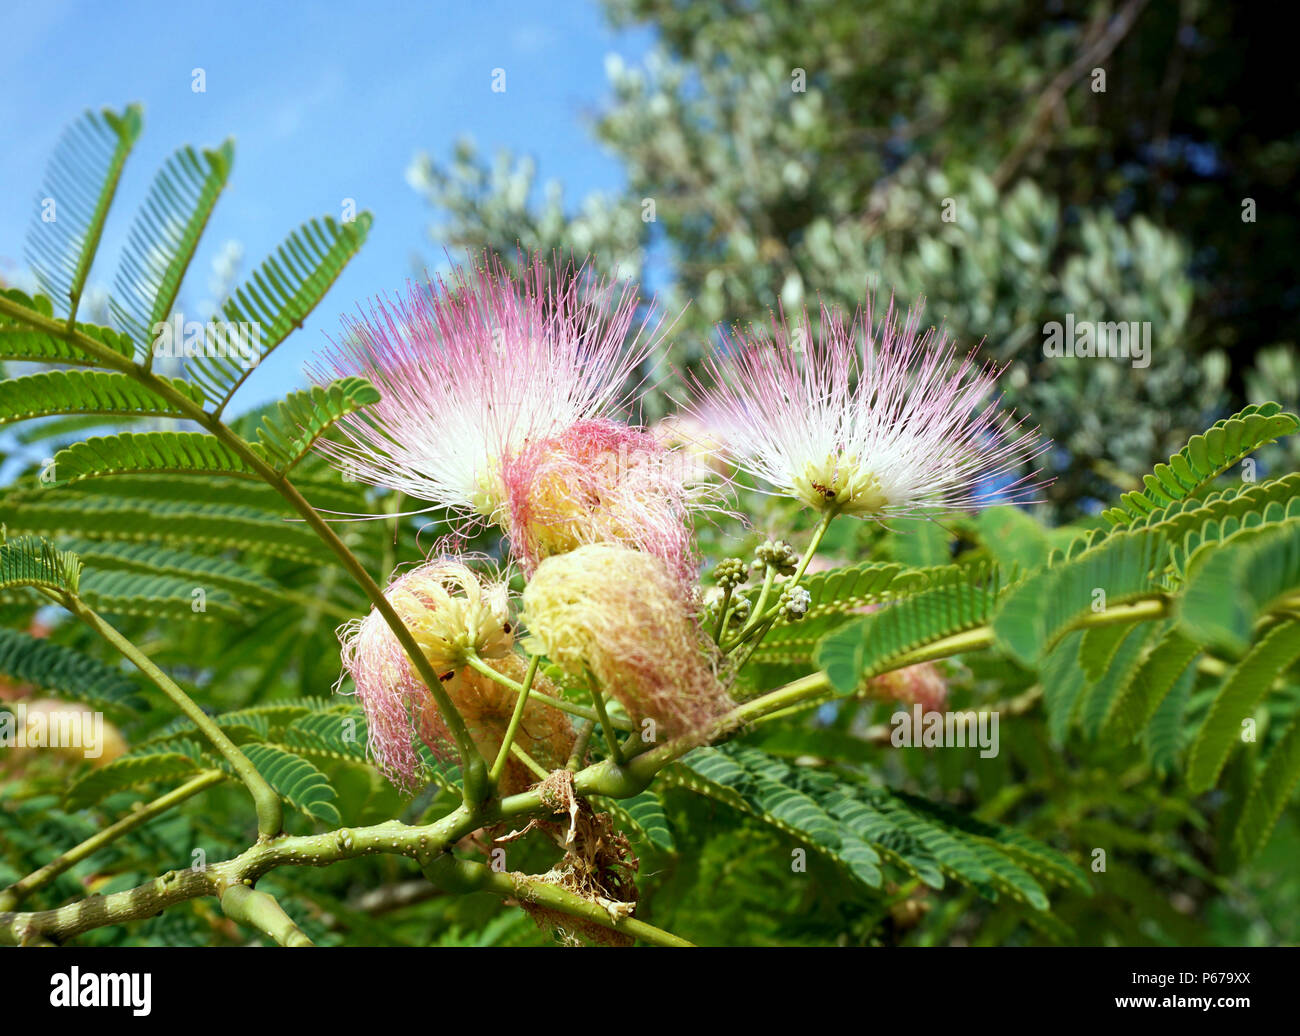 Japanese acacia, Albizia julibrissin, beautiful blooming light pink flowers like mimosa in foreground and green tree leaves and sky in the background Stock Photo